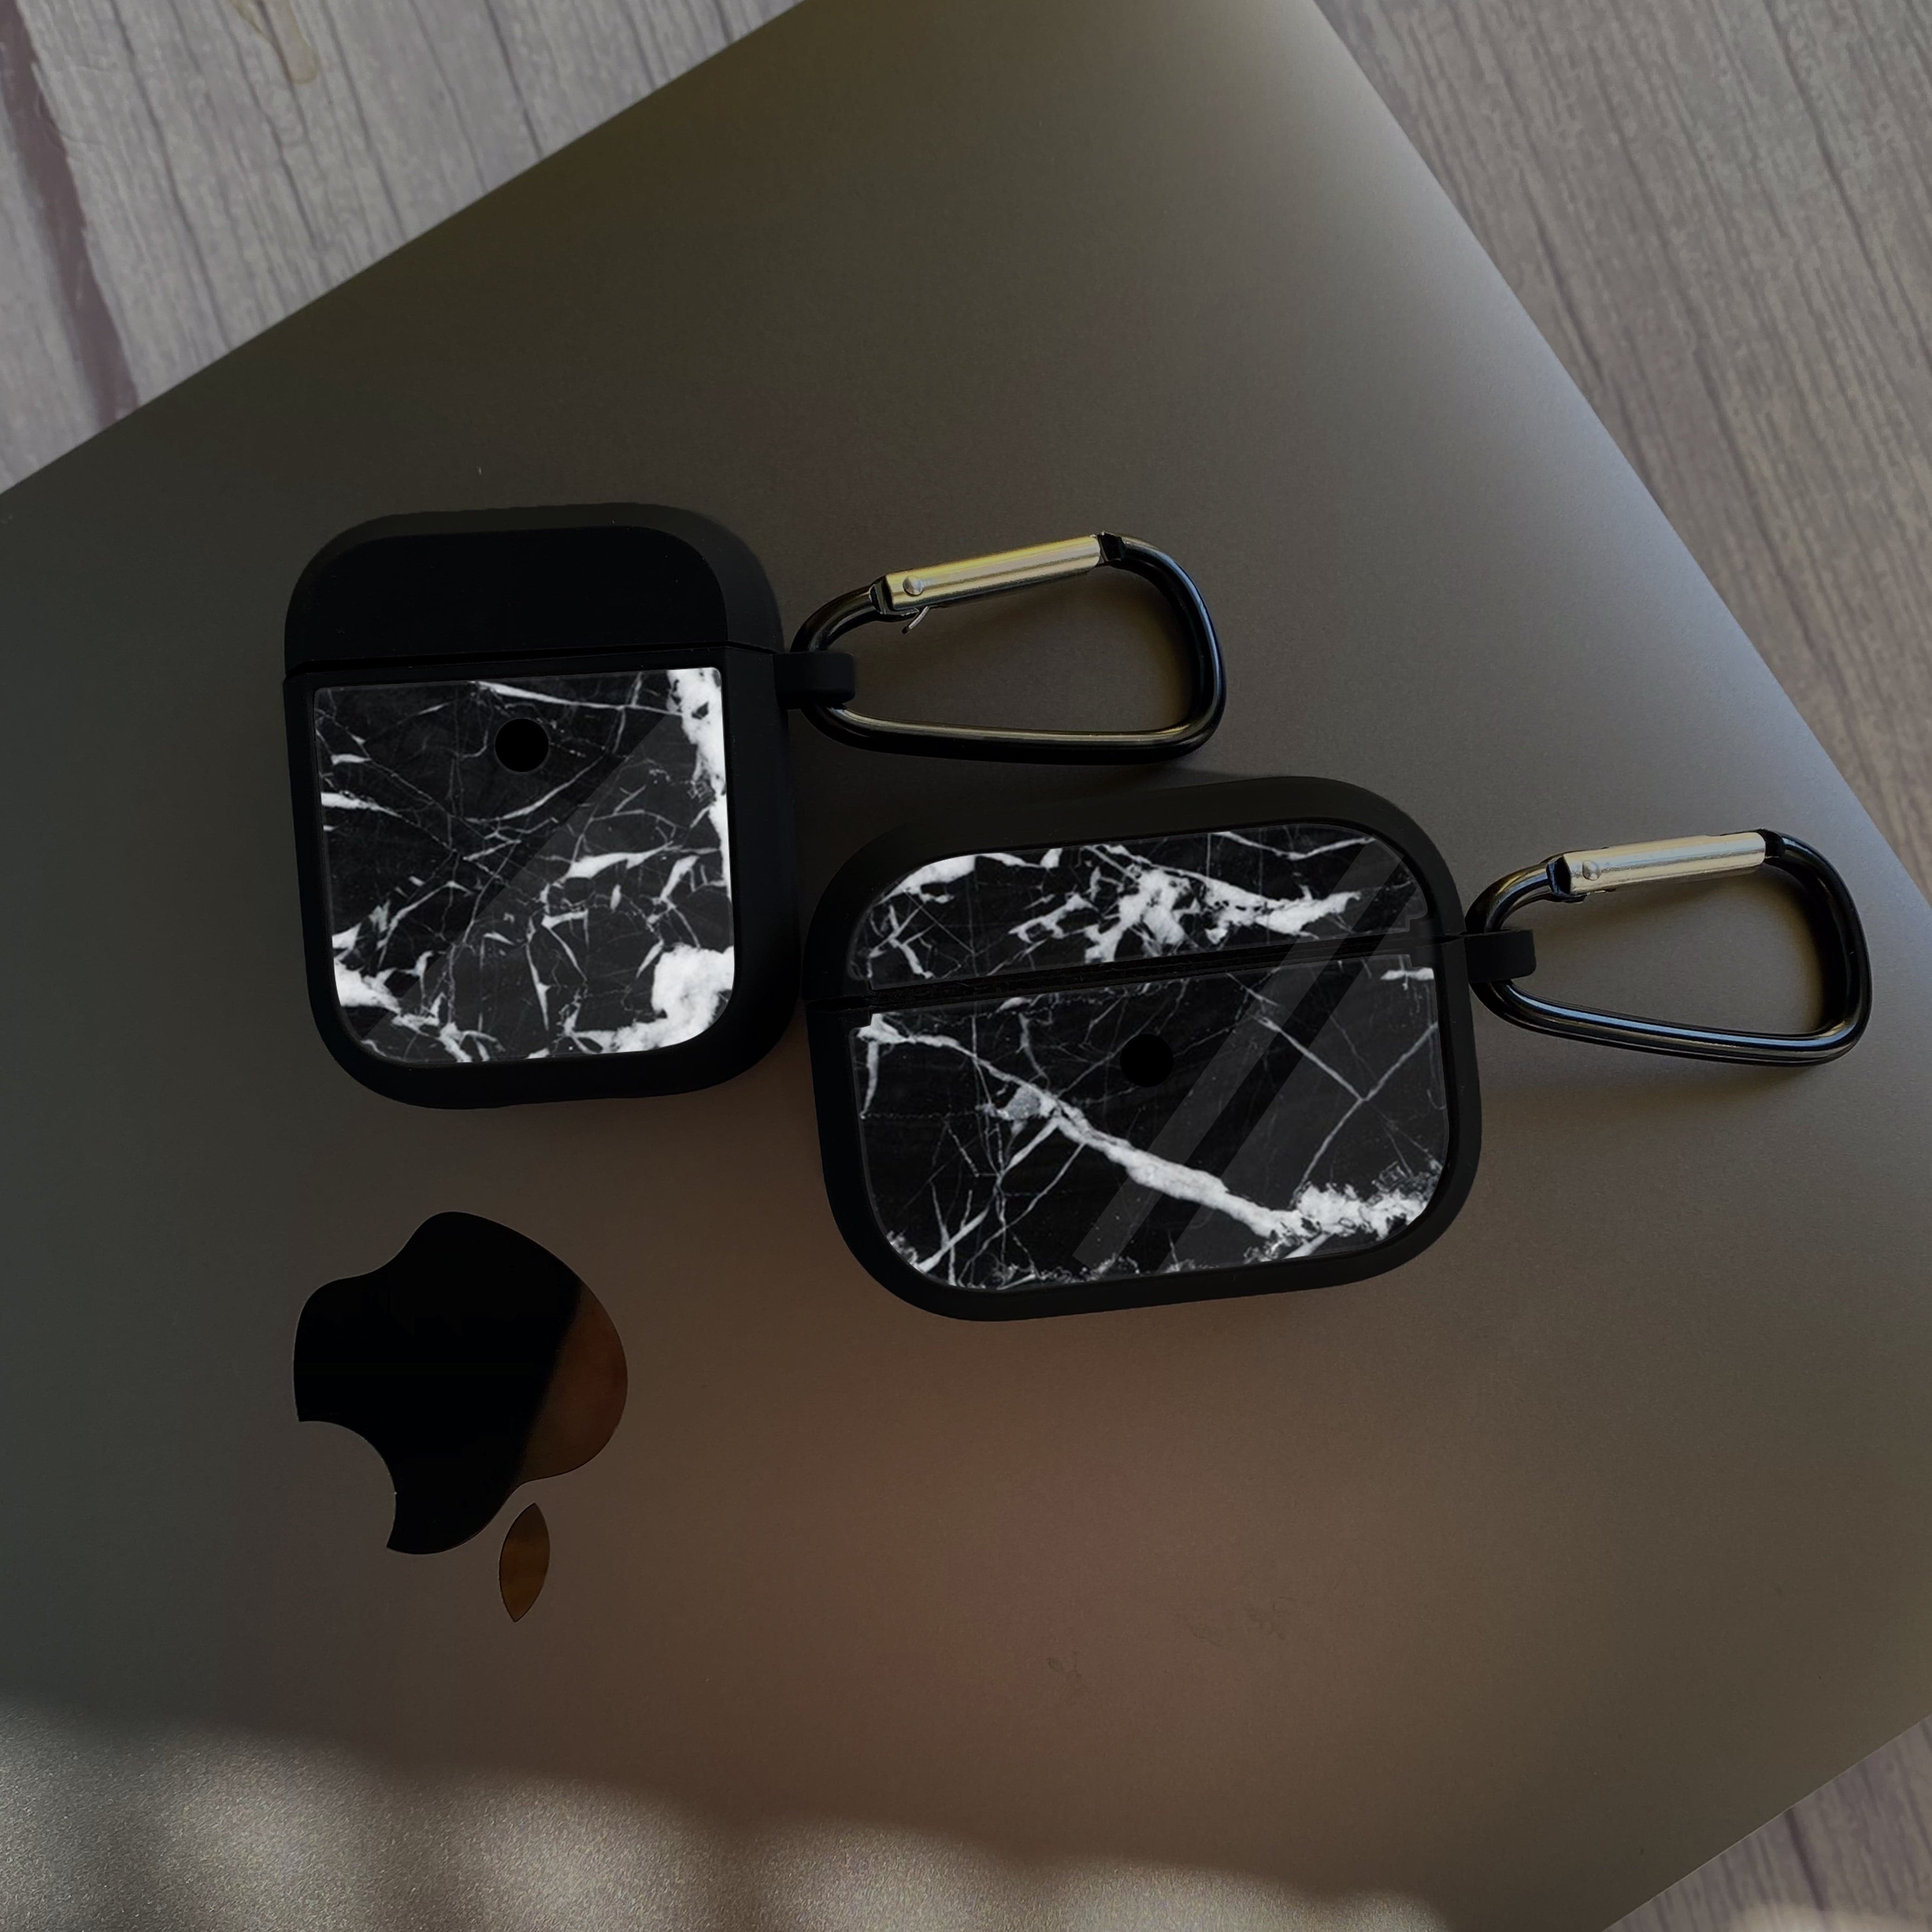 Apple Airpods Case - Black Marble Series 06 - Premium Print with holding clip